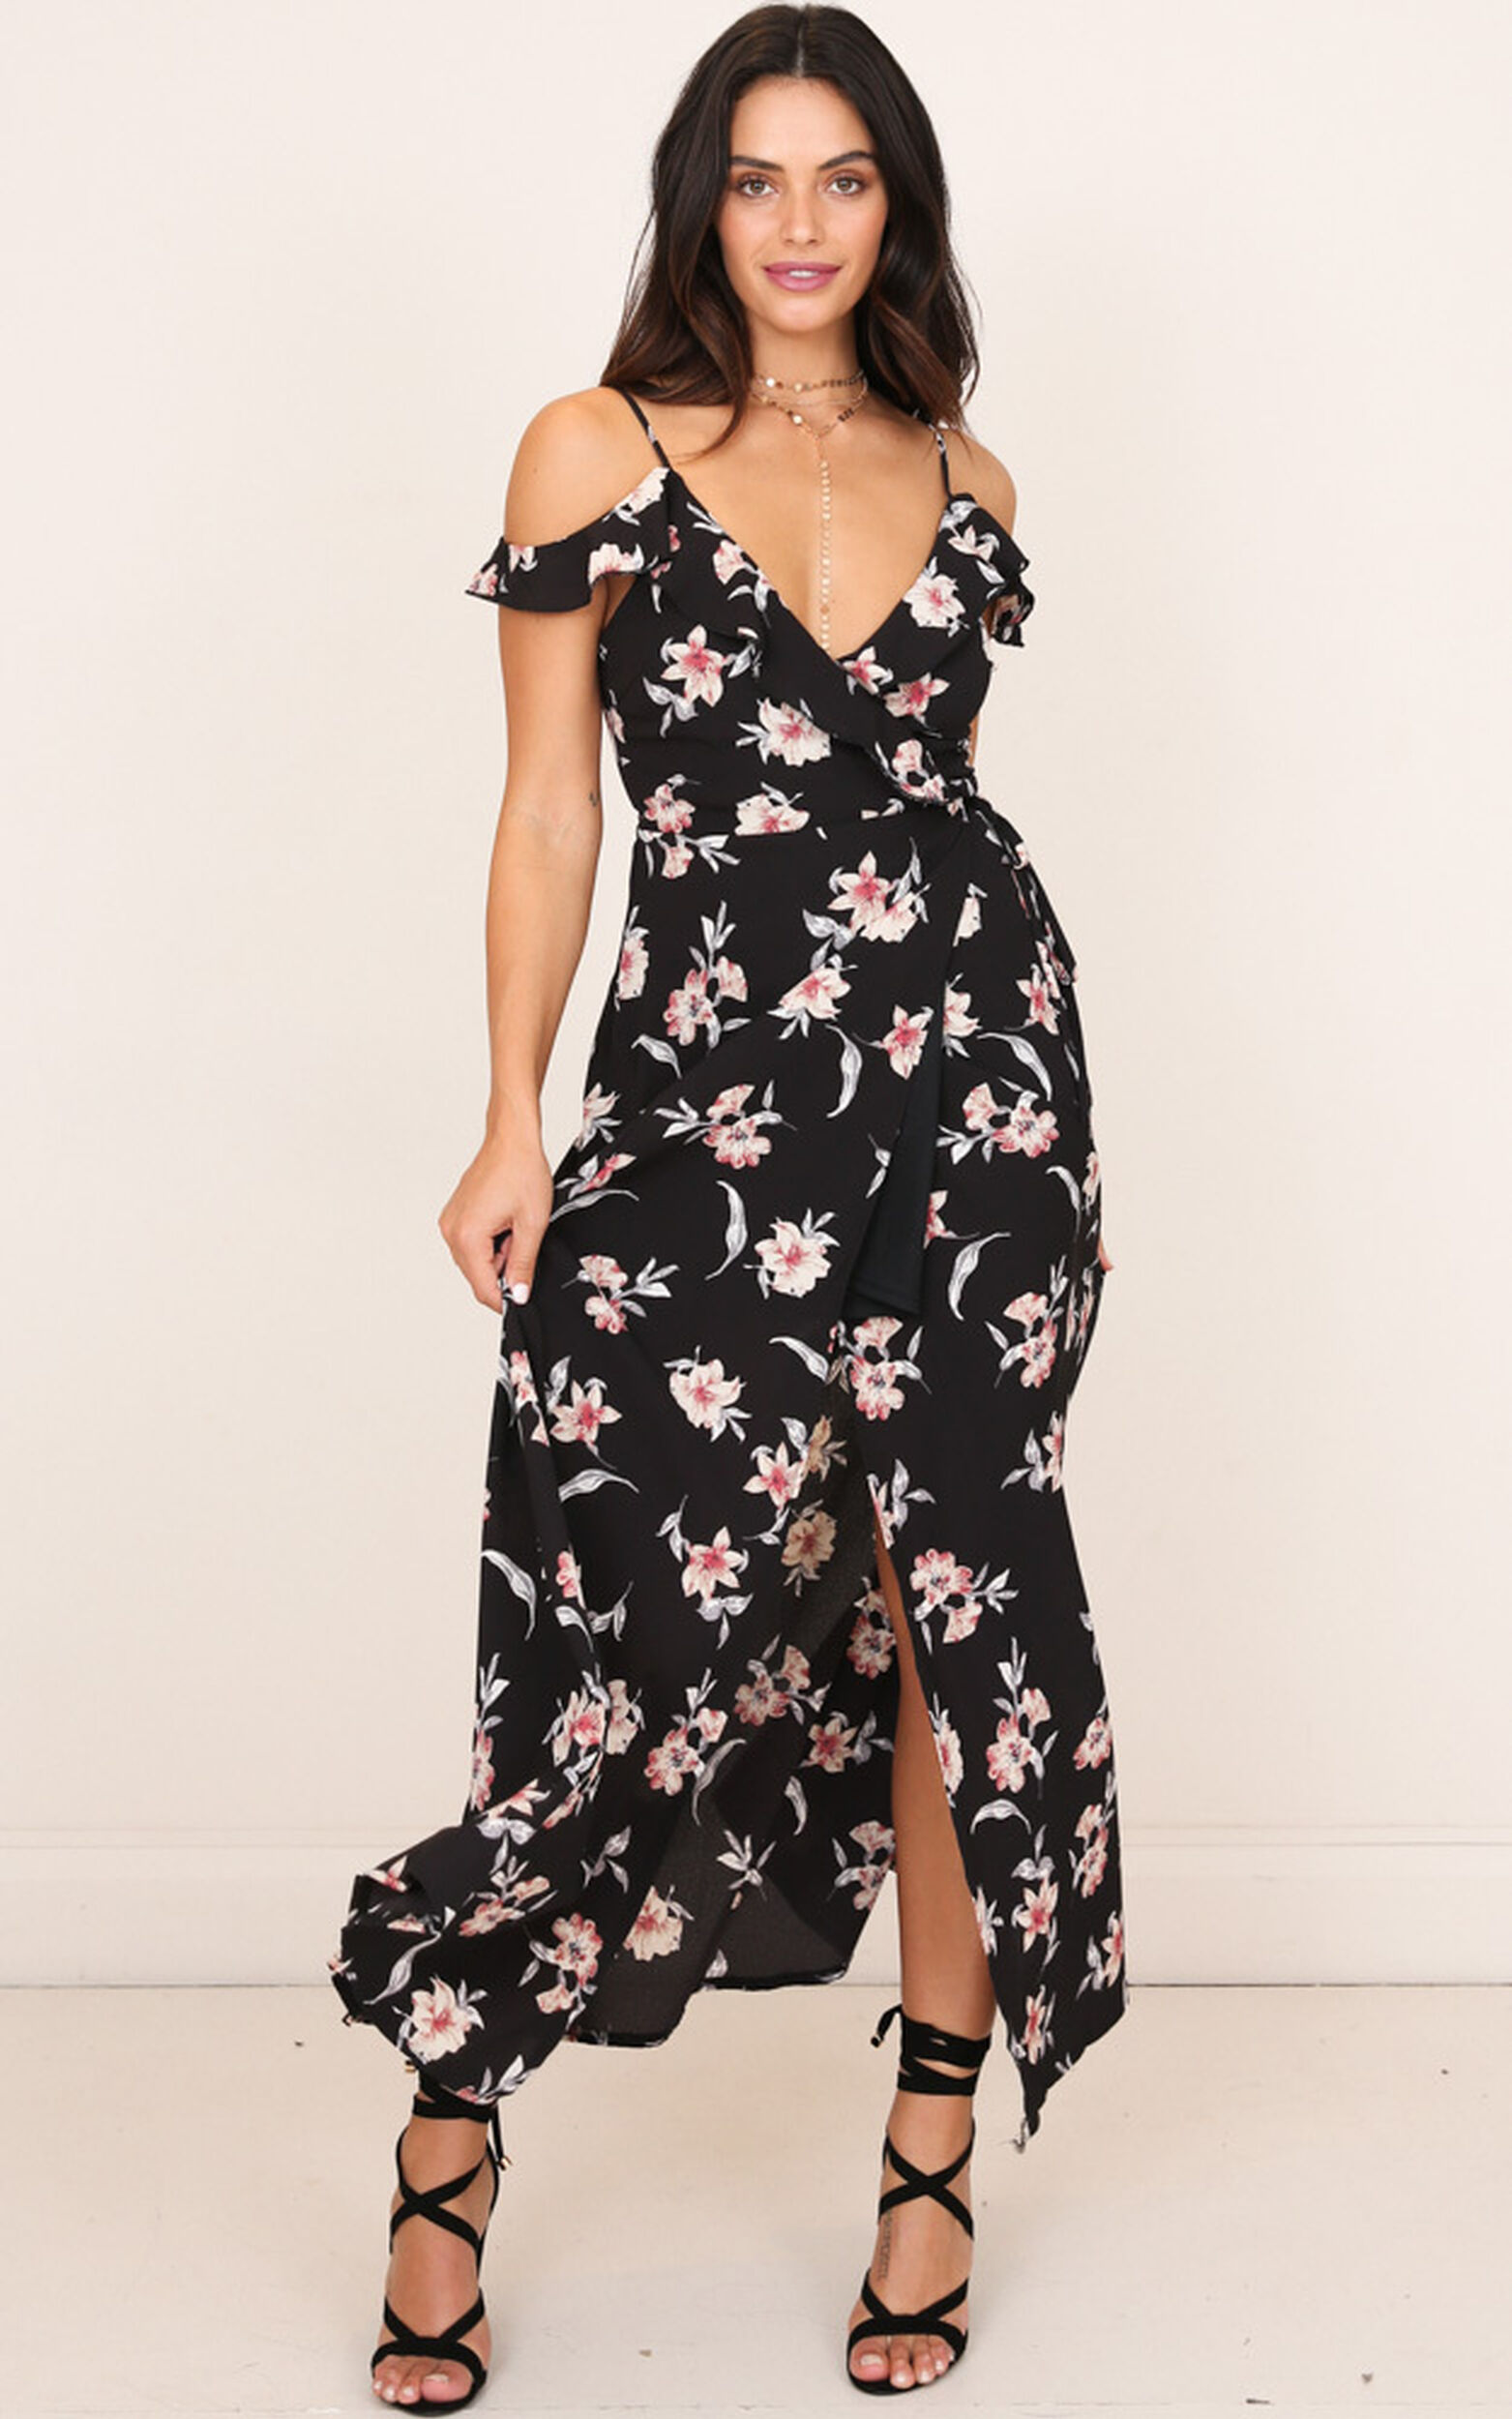 Another Voice Dress in Black Floral - 06, BLK1